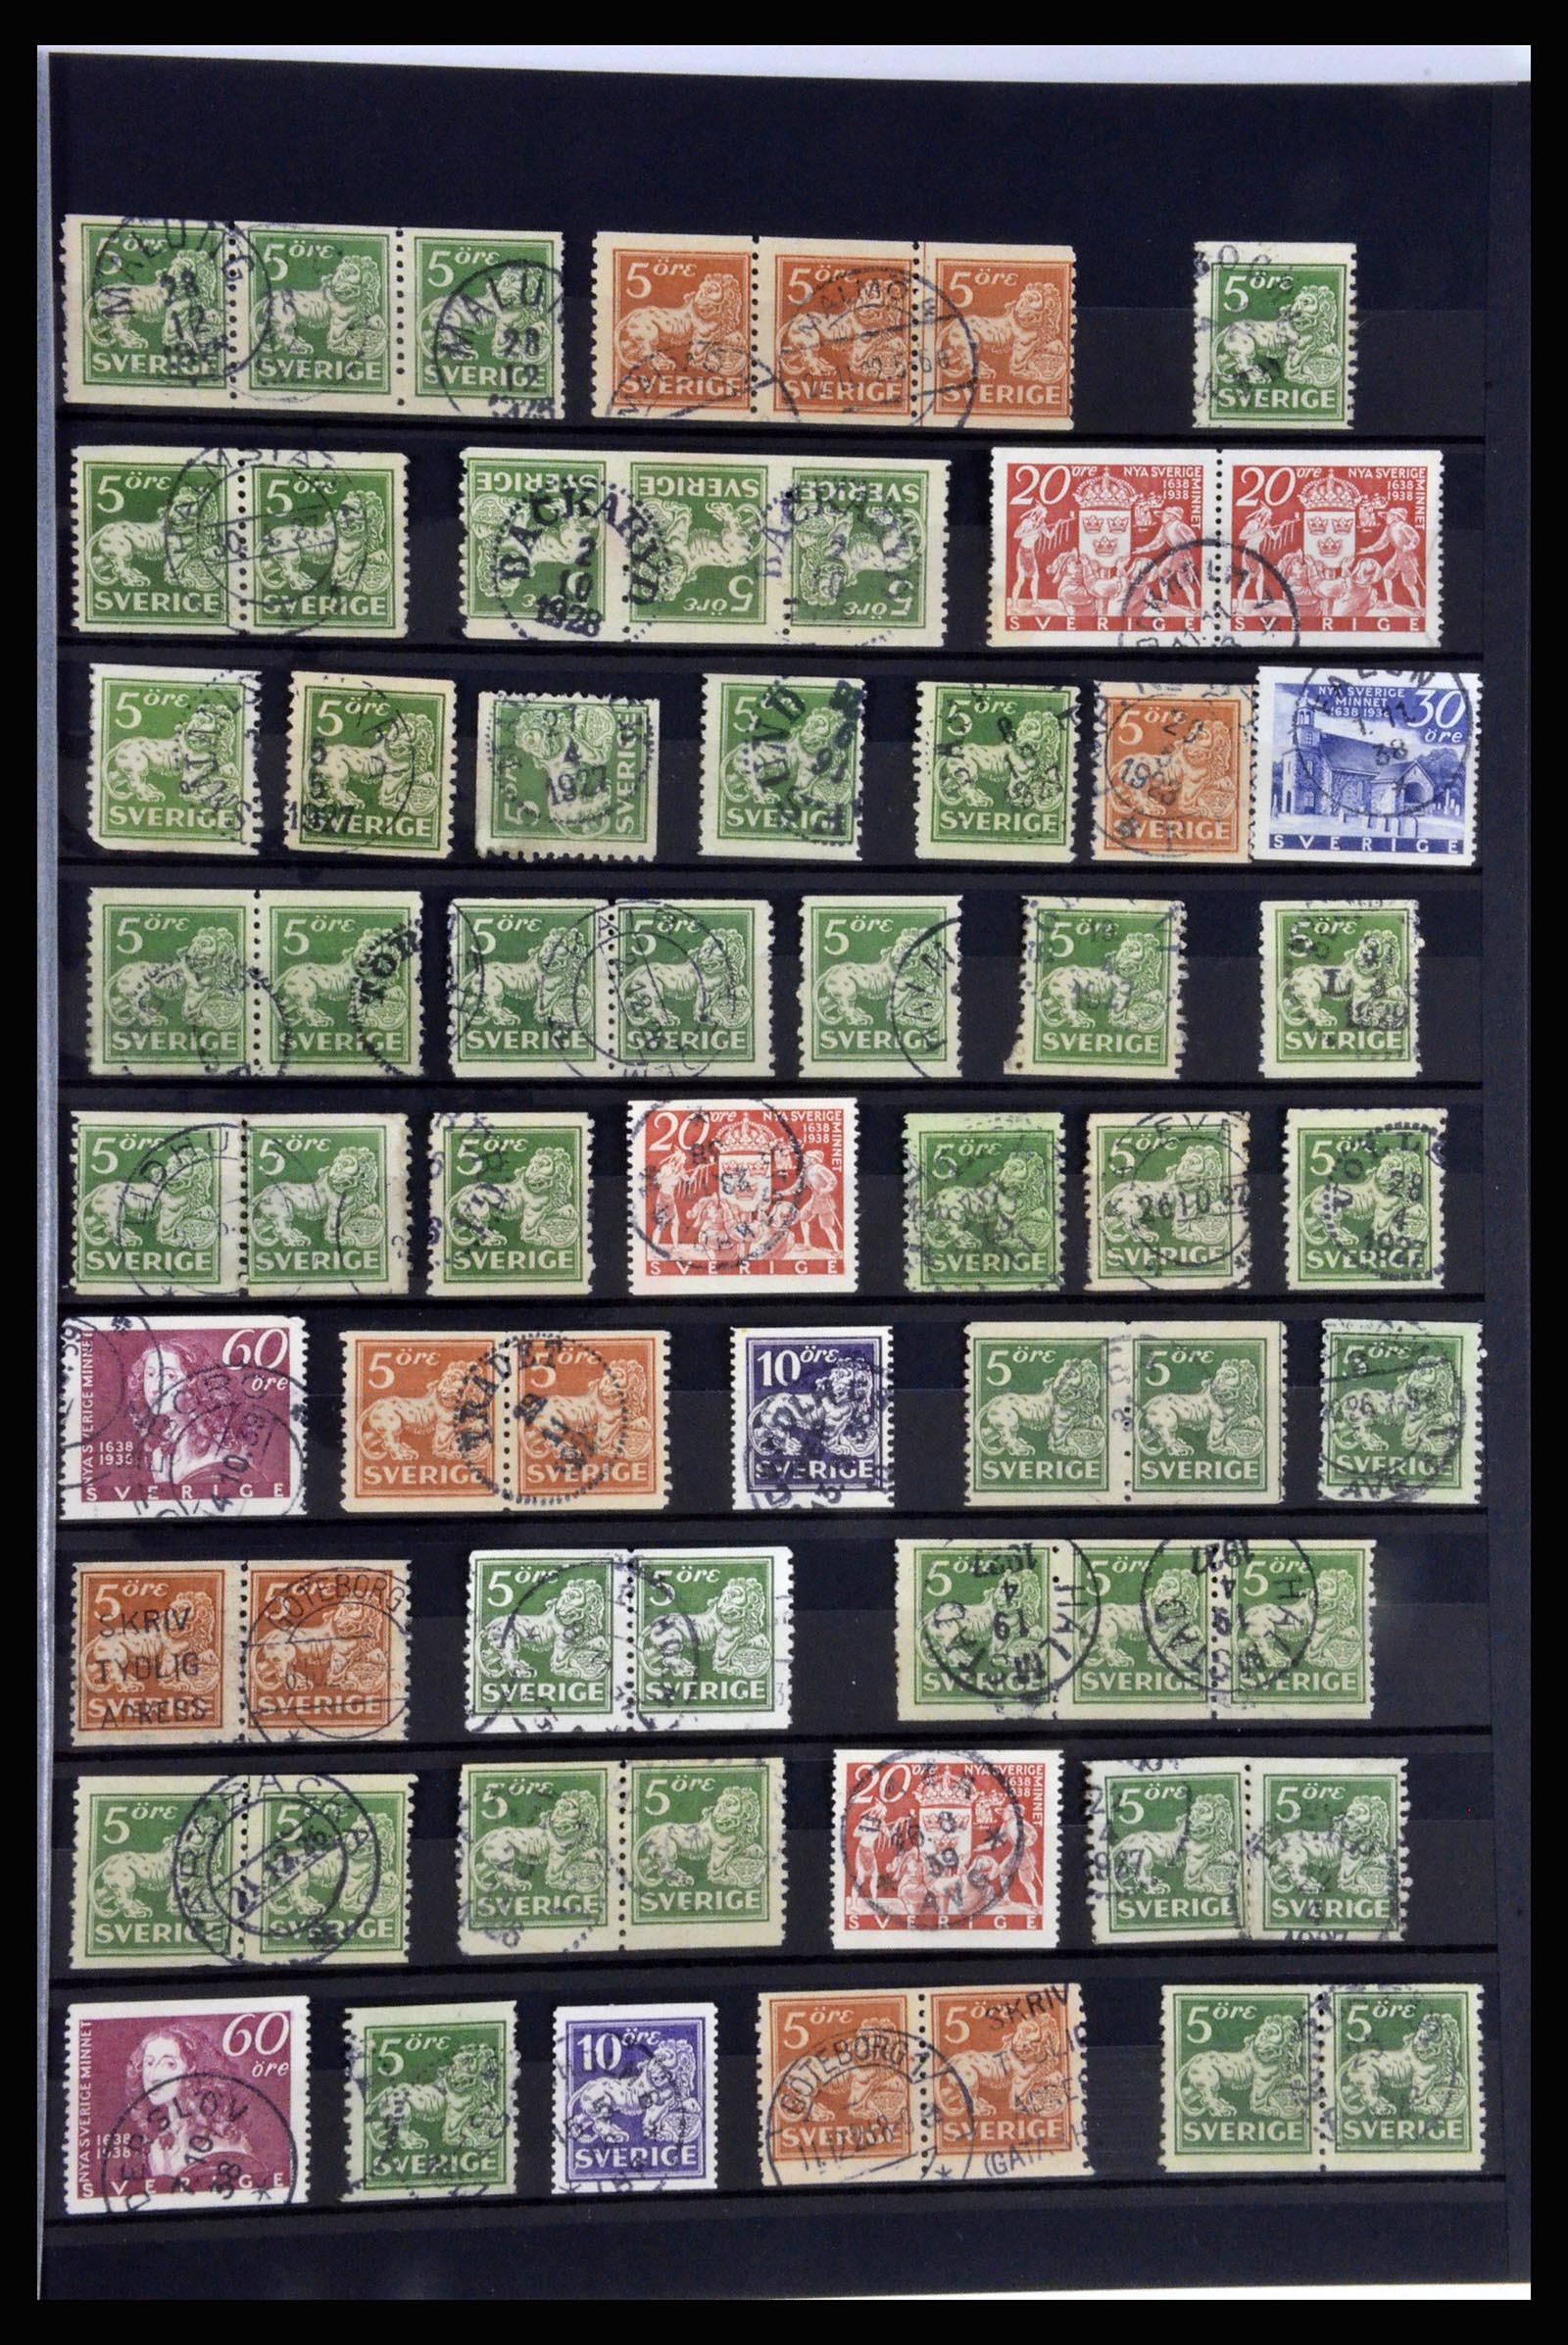 36316 027 - Stamp collection 36316 Sweden cancellations 1920-1938.